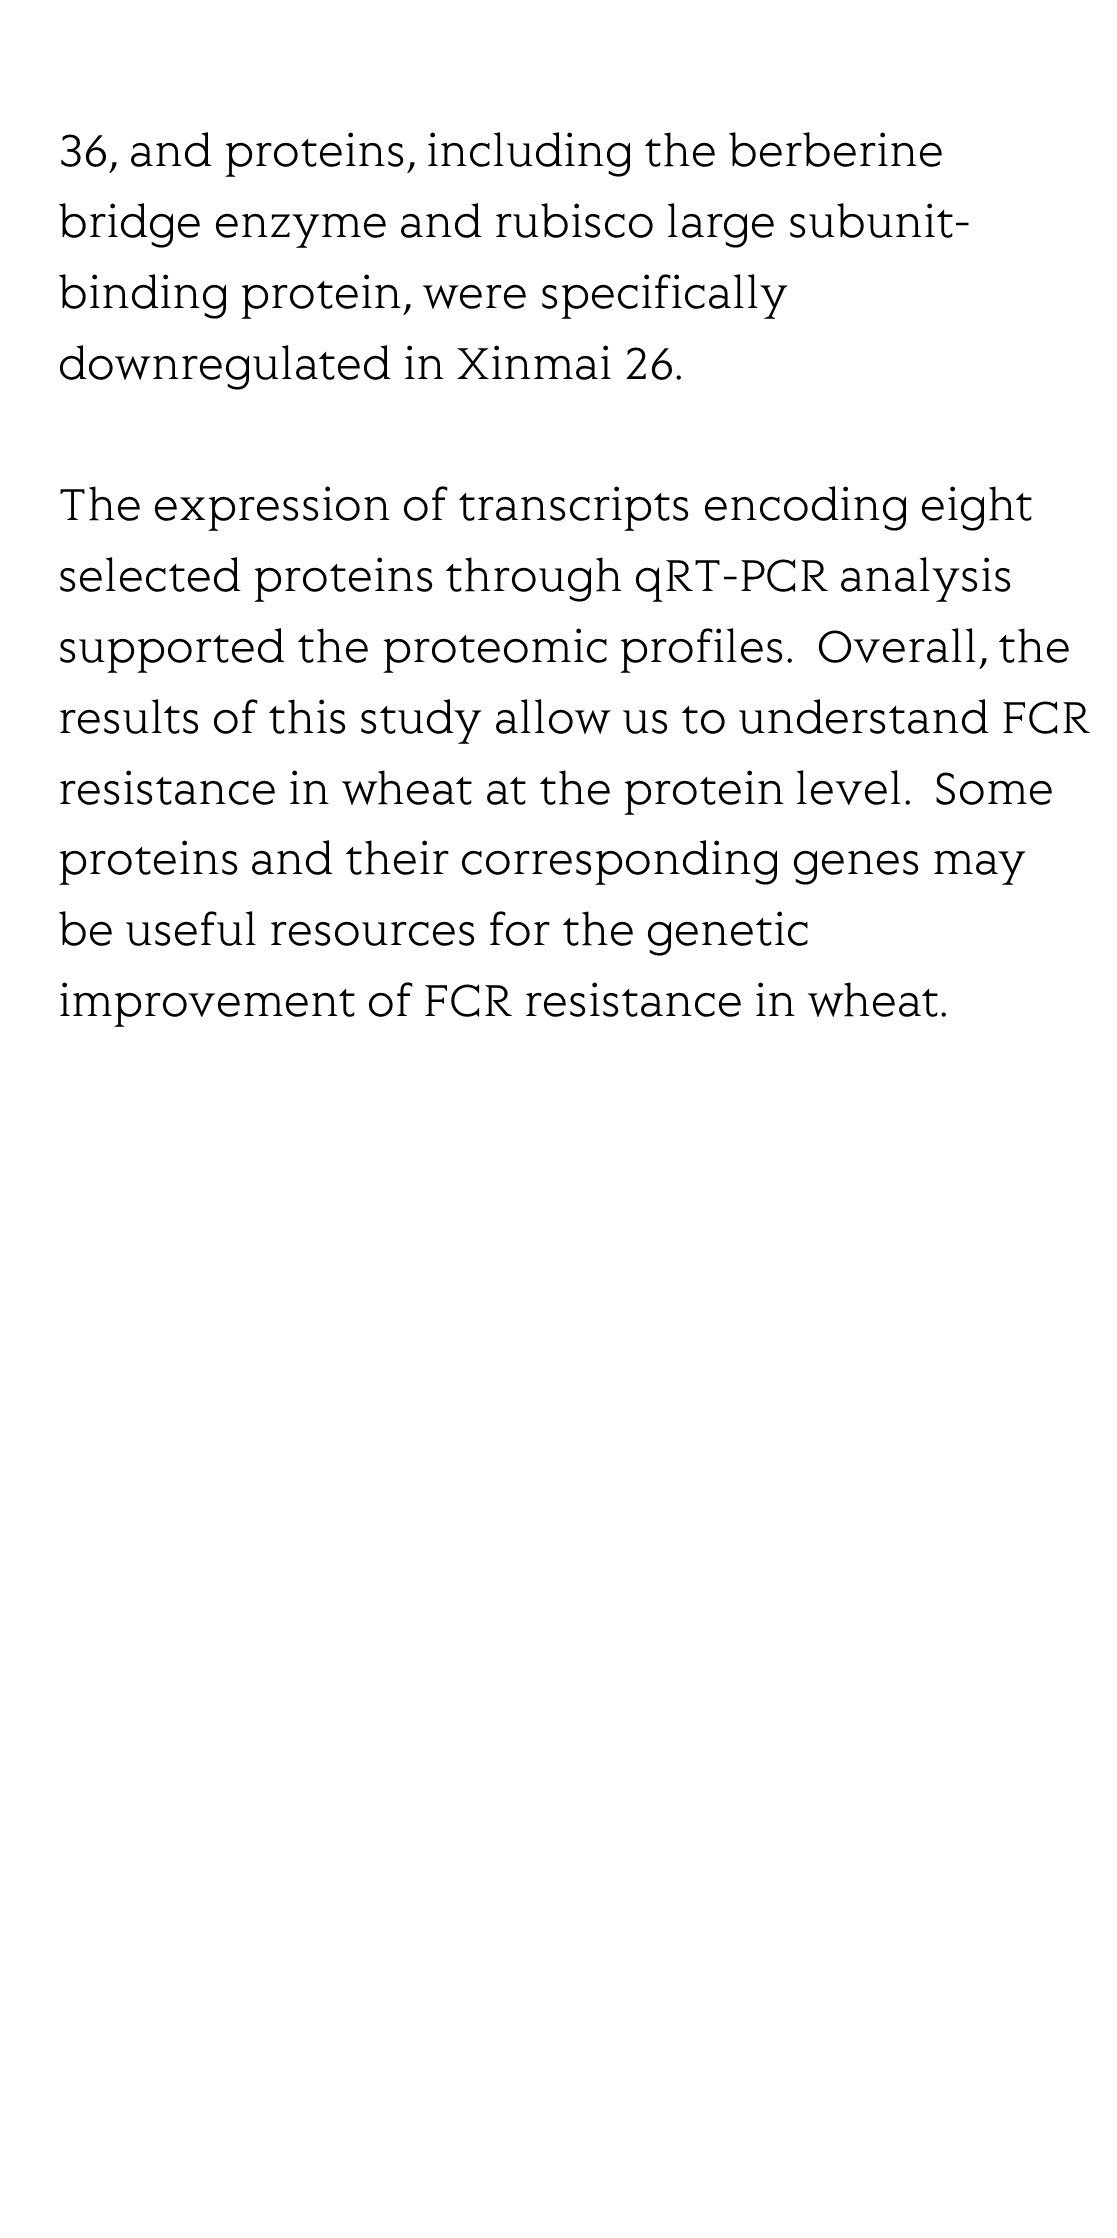 Identification of proteins associated with Fusarium crown rot resistance in wheat using label-free quantification analysis_3